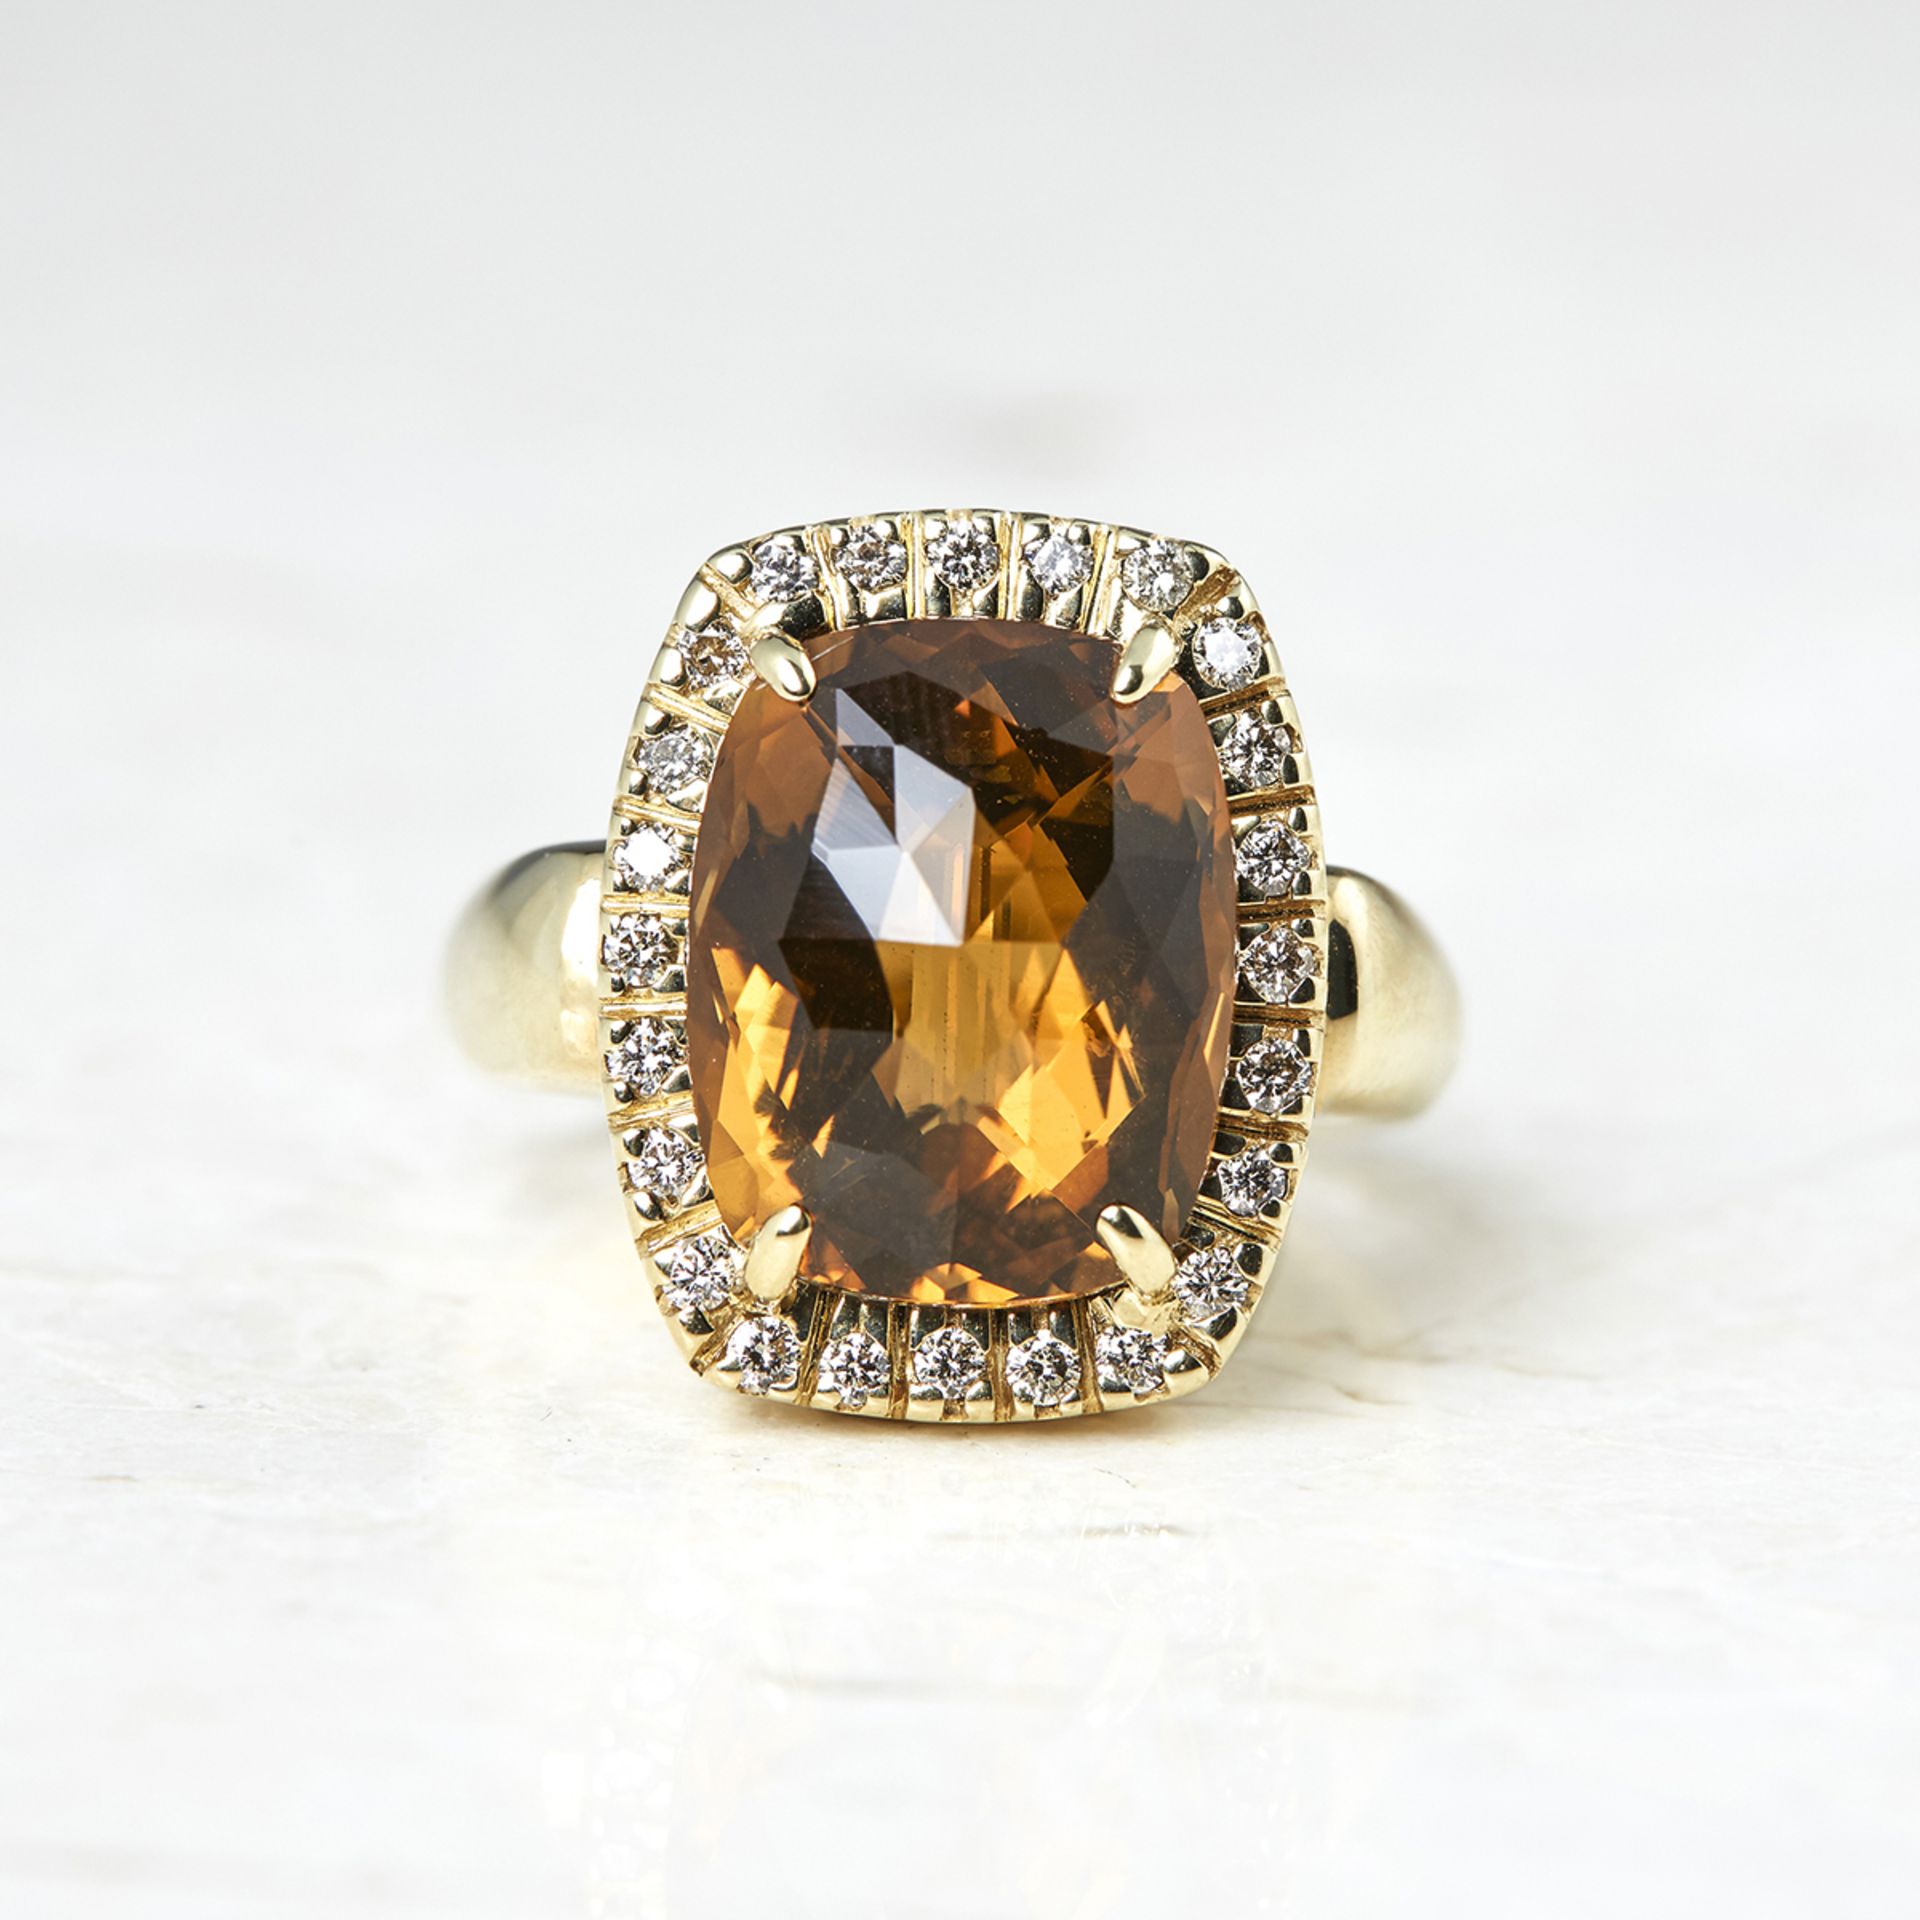 Unbranded 14k Yellow Gold 6.00ct Citrine & 0.40ct Diamond Ring - Image 2 of 5